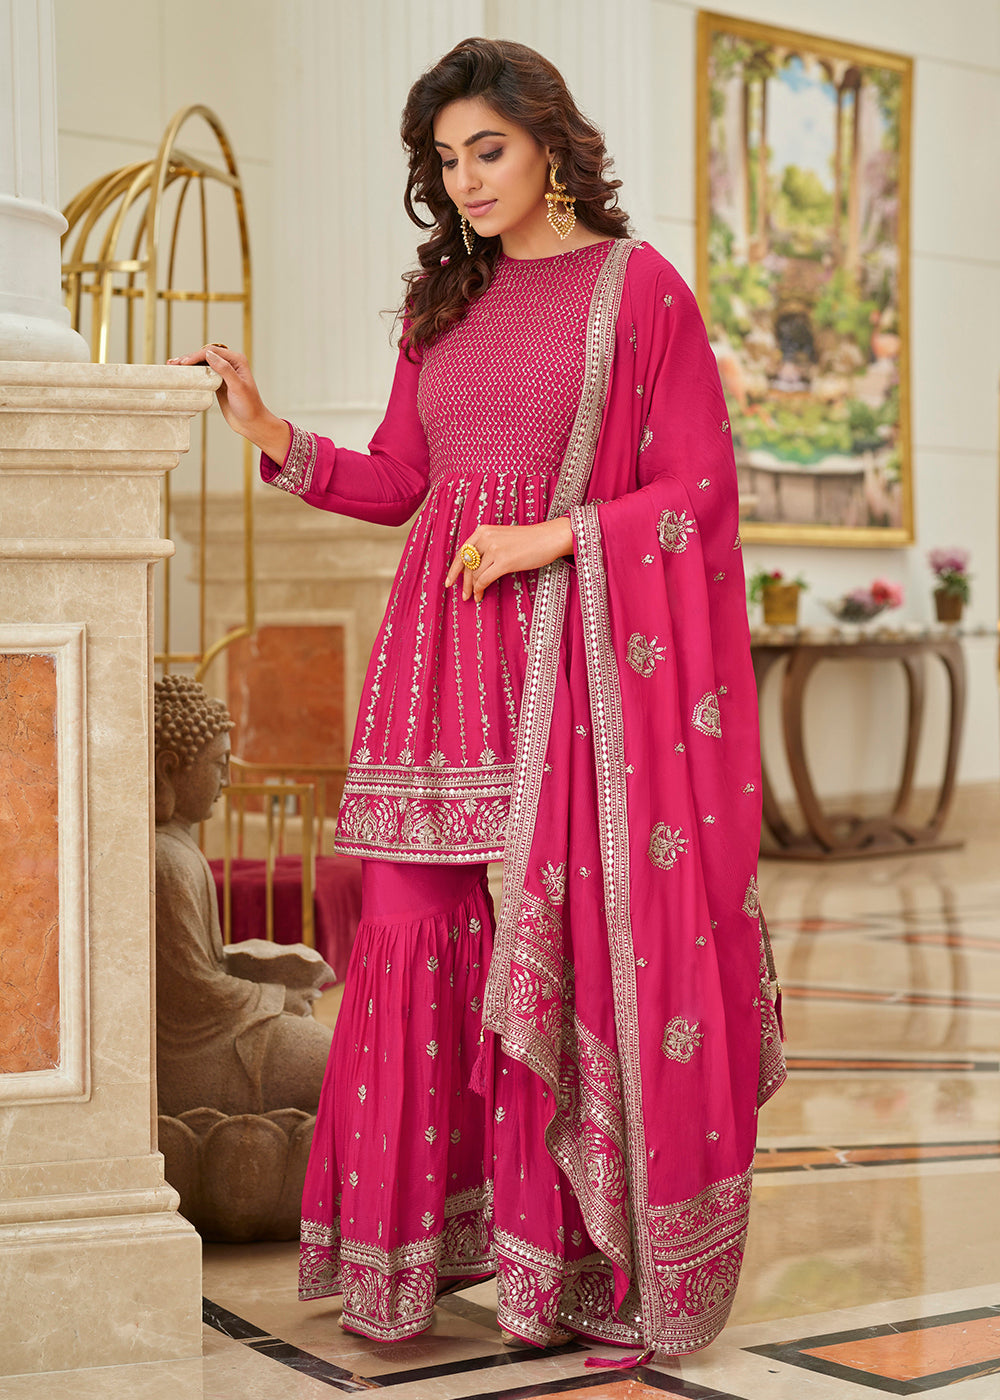 Shop Now Heavy Chinon Rani Pink Sequins Festive Gharara Suit Online at Empress Clothing in USA, UK, Canada, Germany & Worldwide.